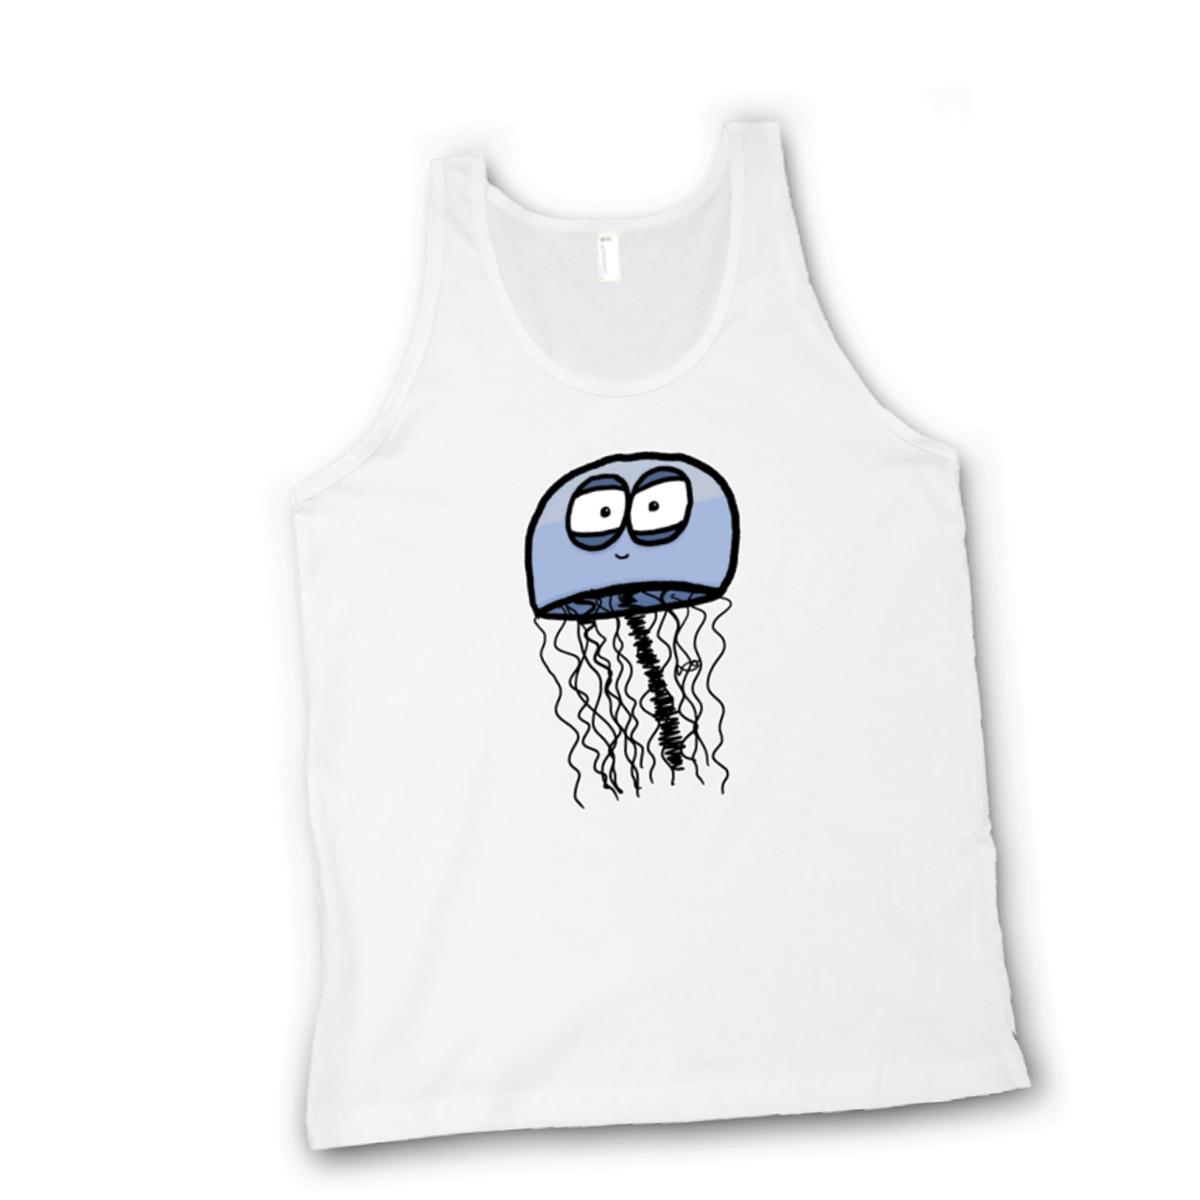 Jelly Fish Unisex Tank Top Large white